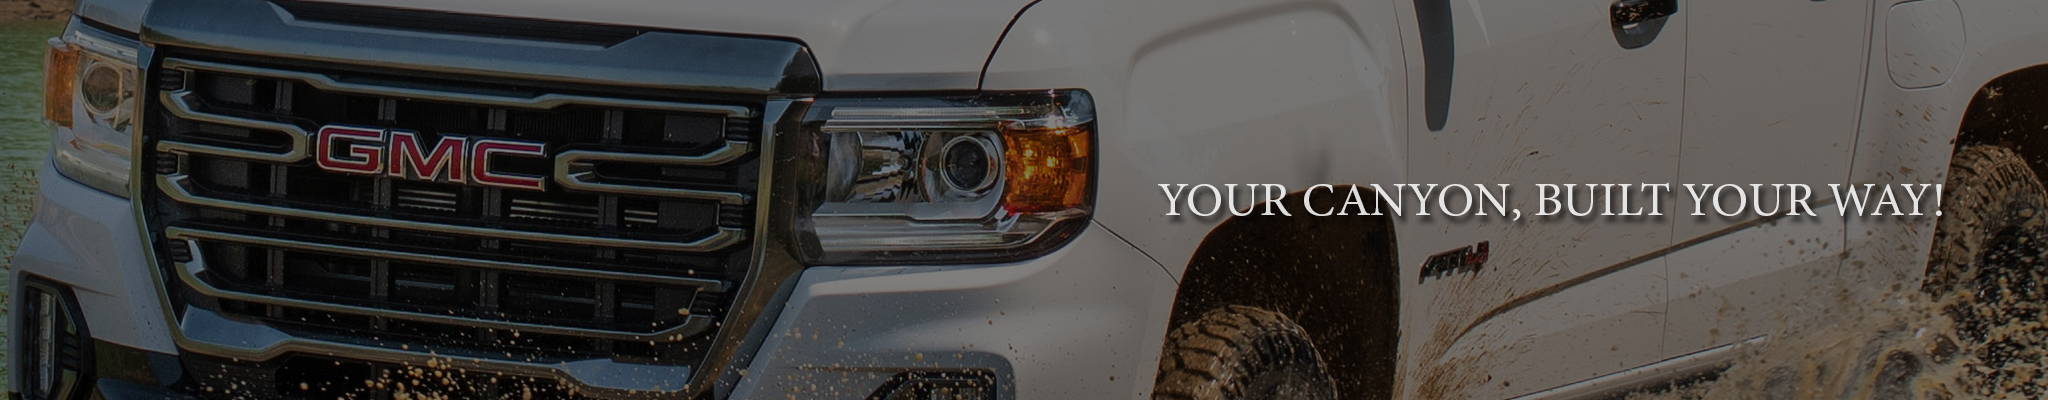 3C Truck Conversions Your Chevy Truck Built Your Way! Customize your Build Here.